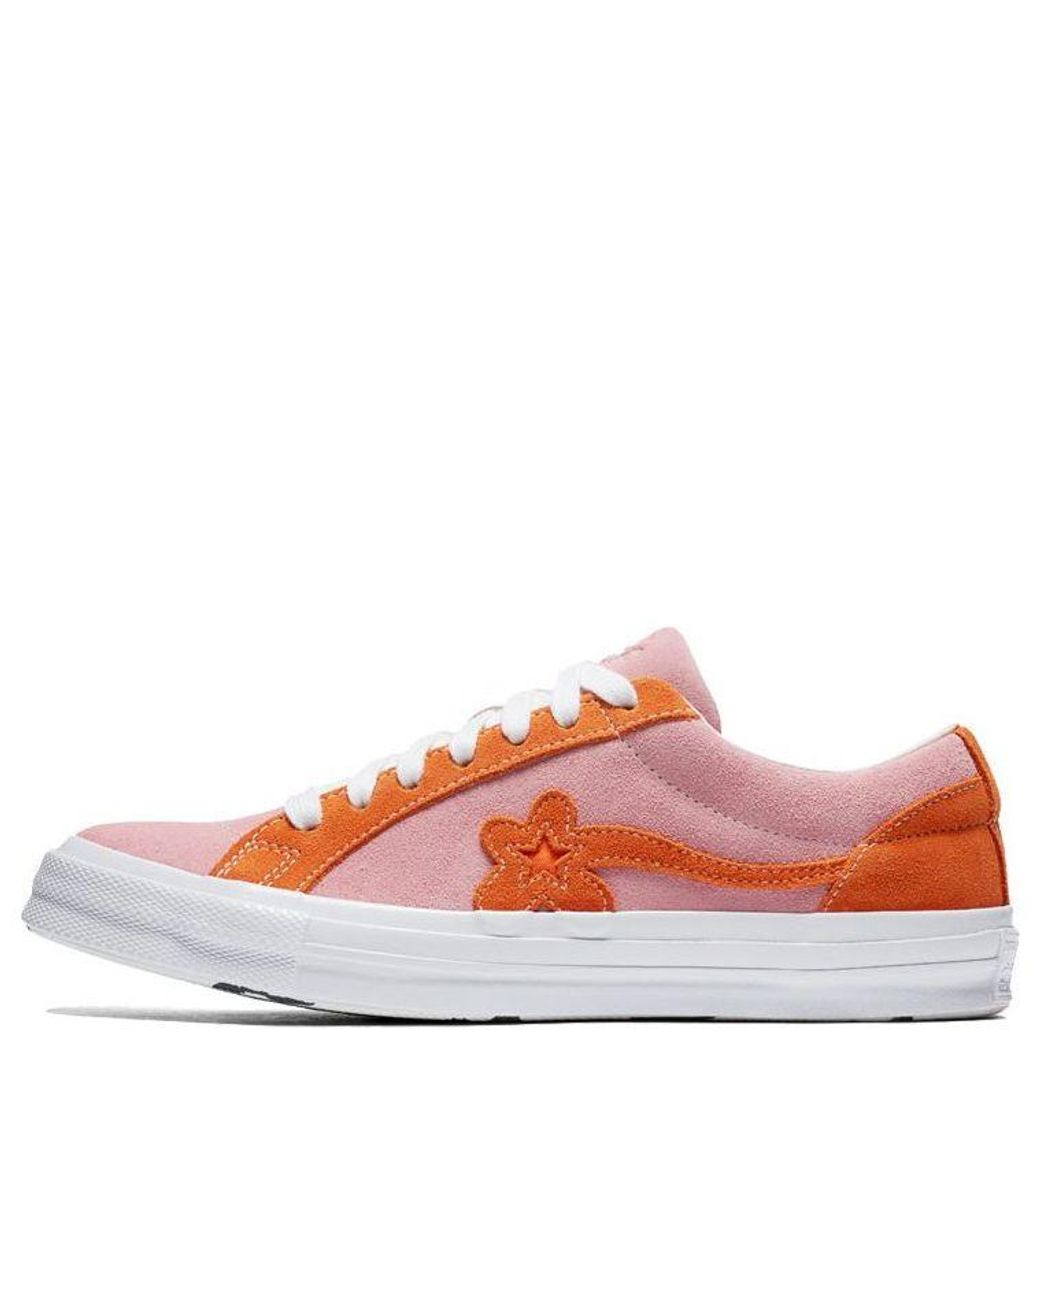 Converse One Star Ox Tyler The Creator Golf Le Fleur Pink Orange in for Men Lyst